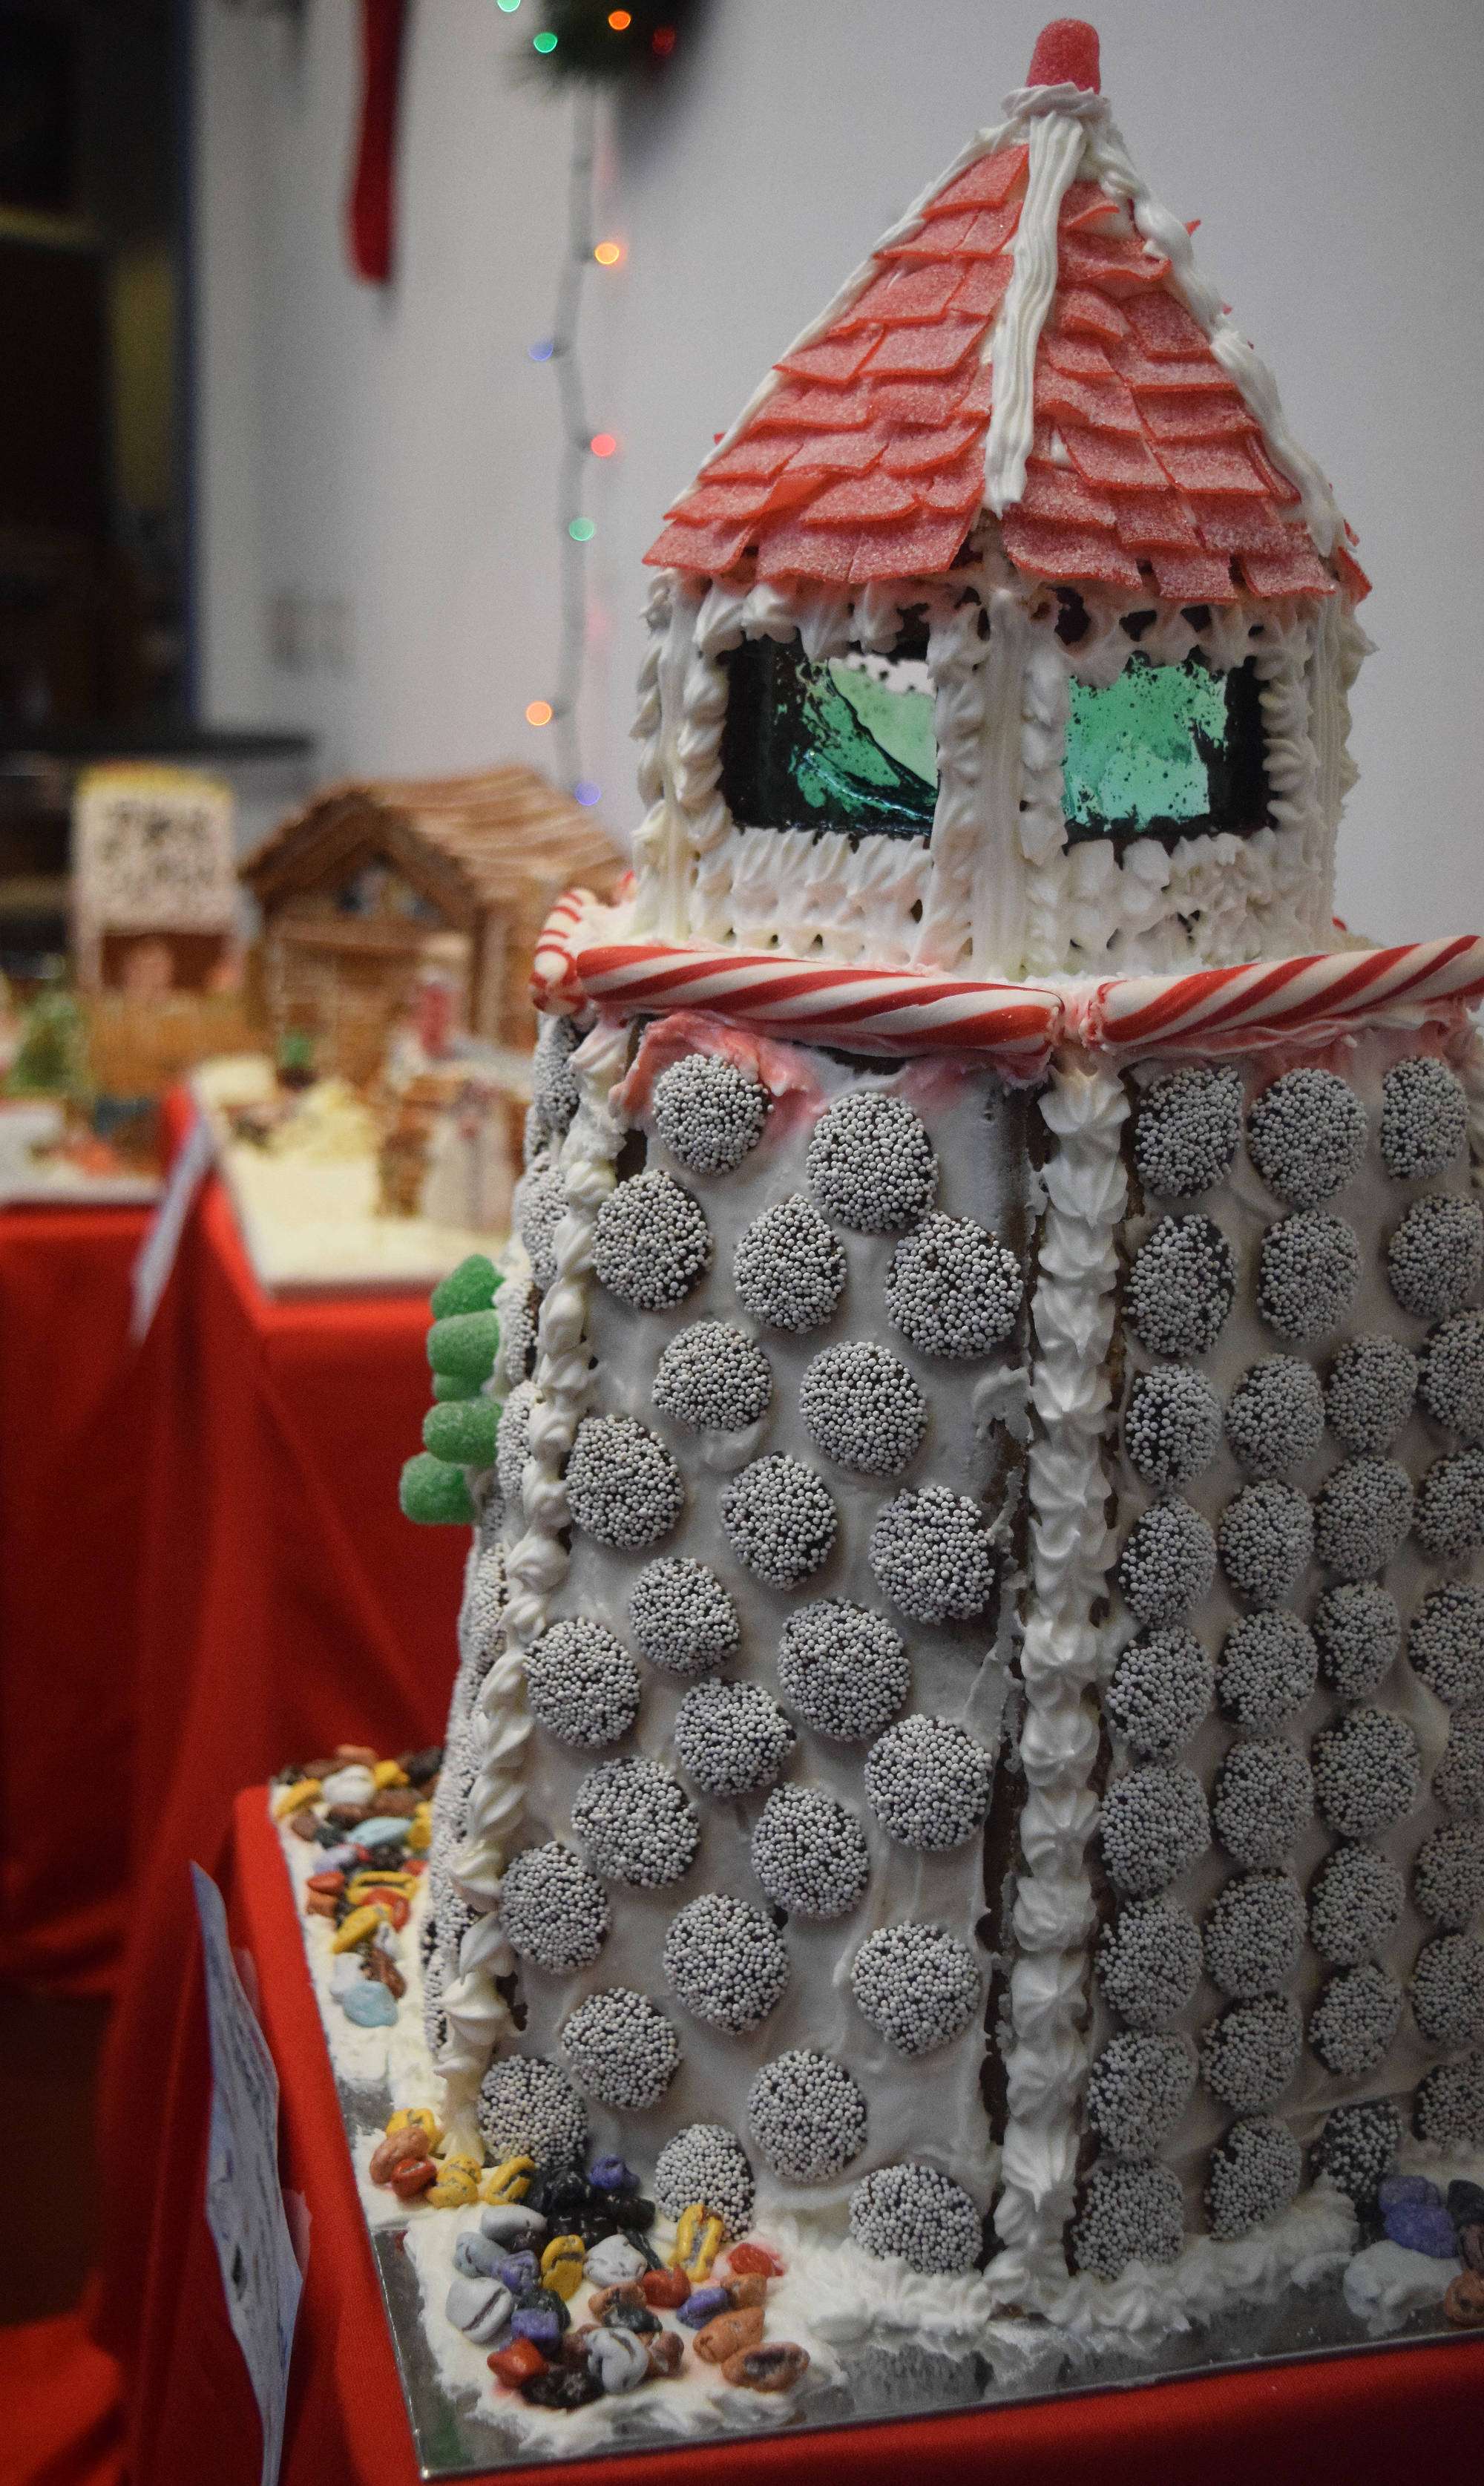 An entry by Sarah Roberts sits on display in the Kenai Chamber of Commerce and Visitor Center gingerbread house contest. The gingerbread houses will be on display until Dec. 21 in the visitor center. (Photo by Joey Klecka/Peninsula Clarion)